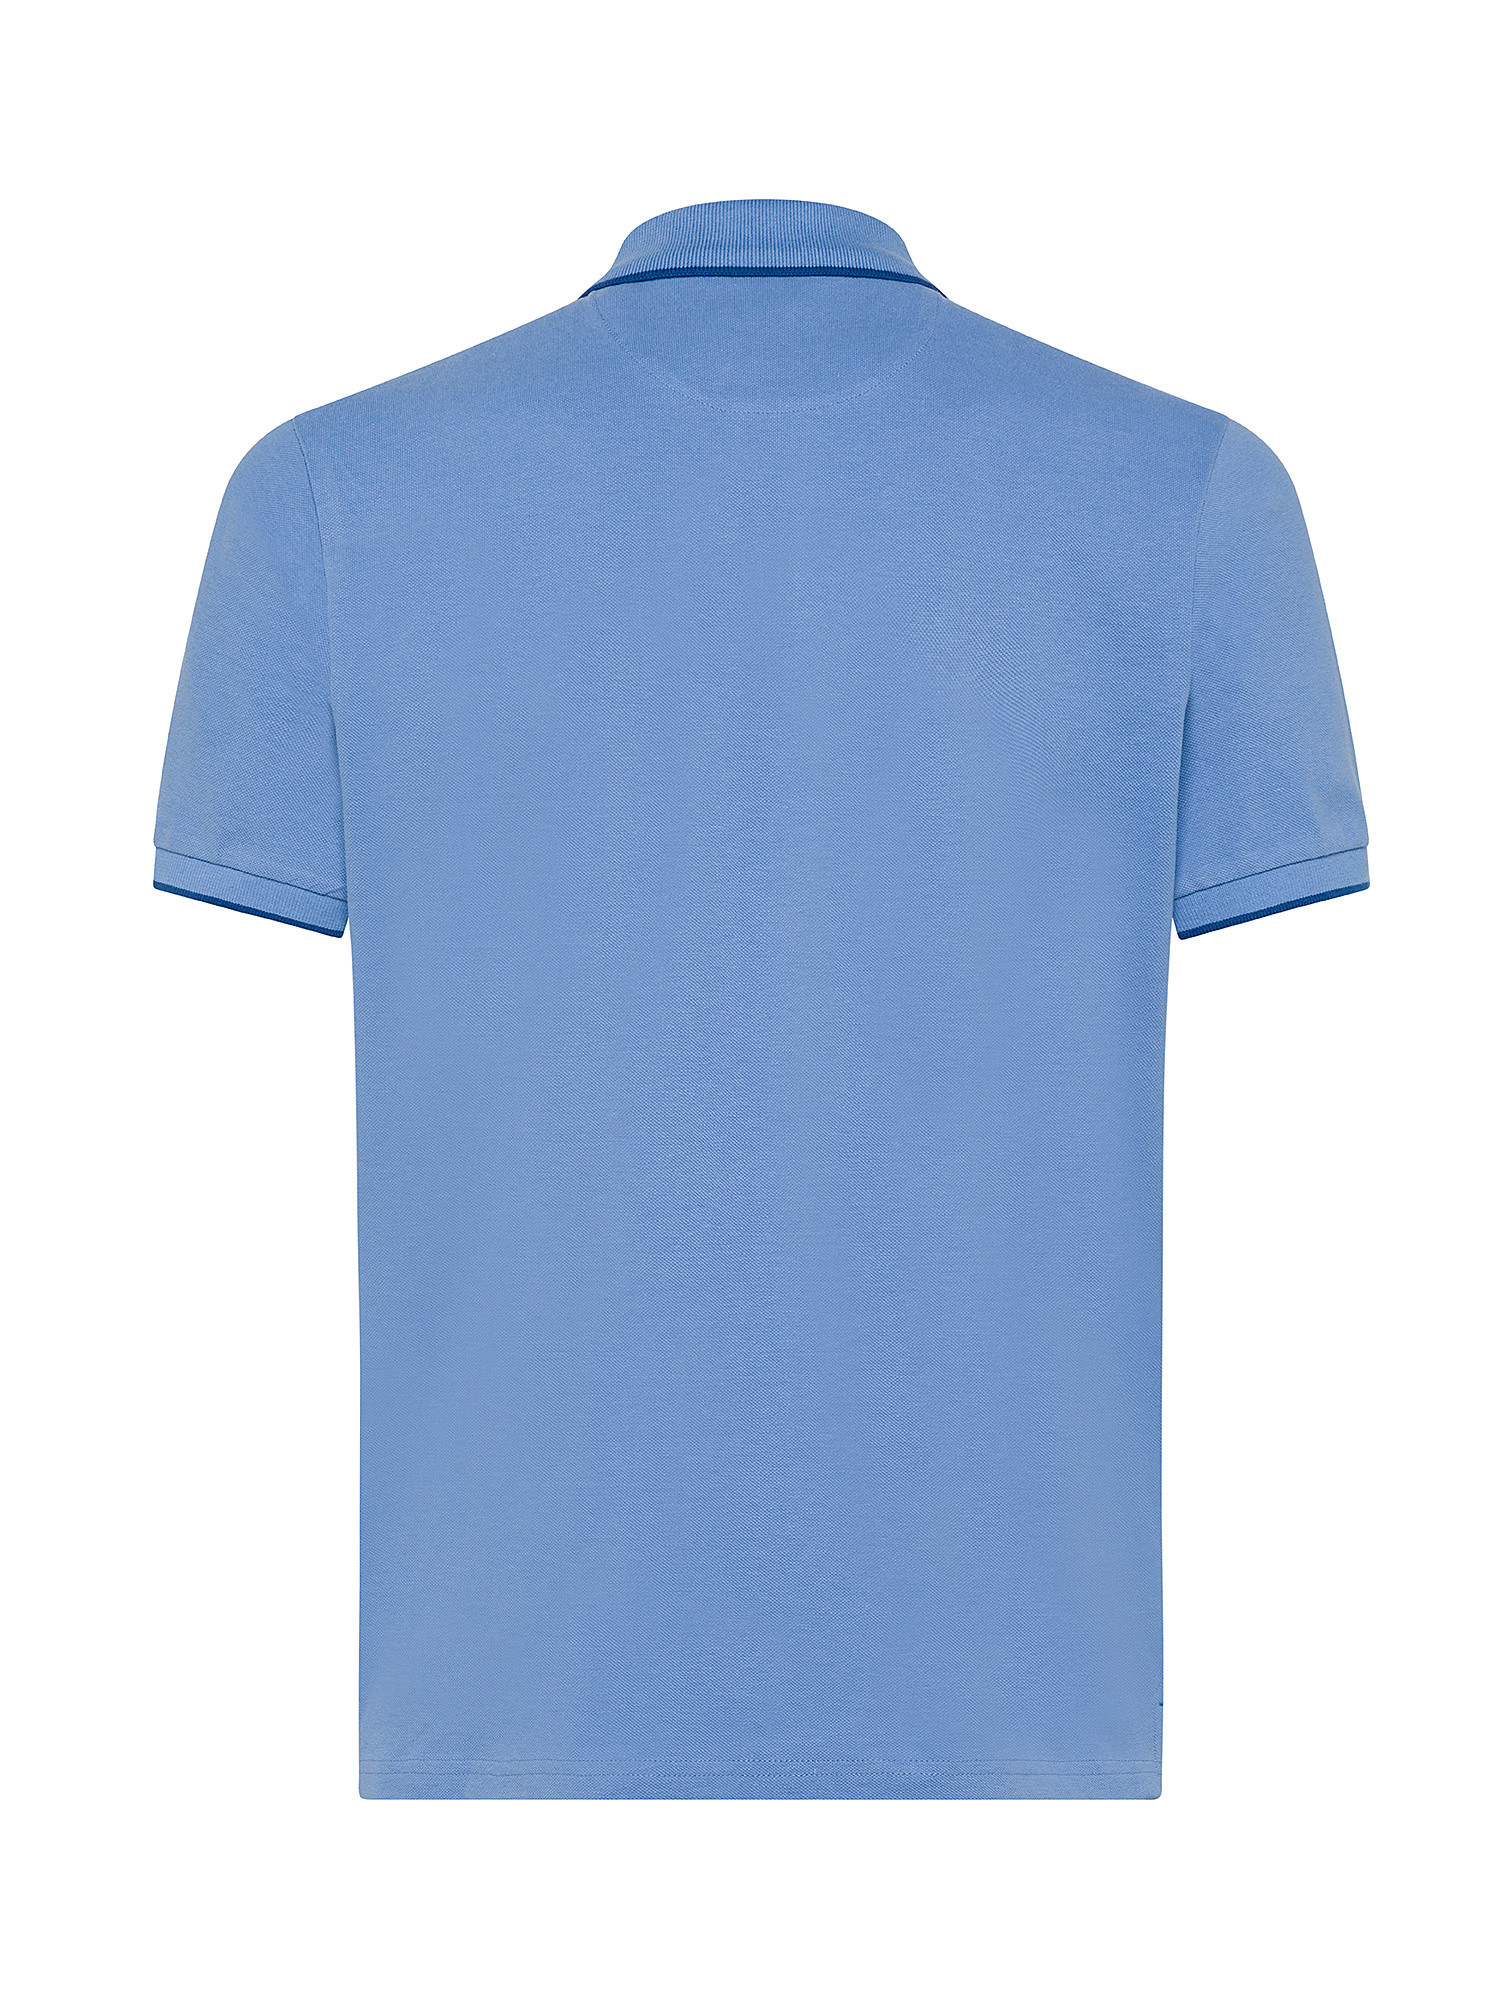 North Sails - Organic cotton piqué polo shirt with micrologo, Light Blue, large image number 1